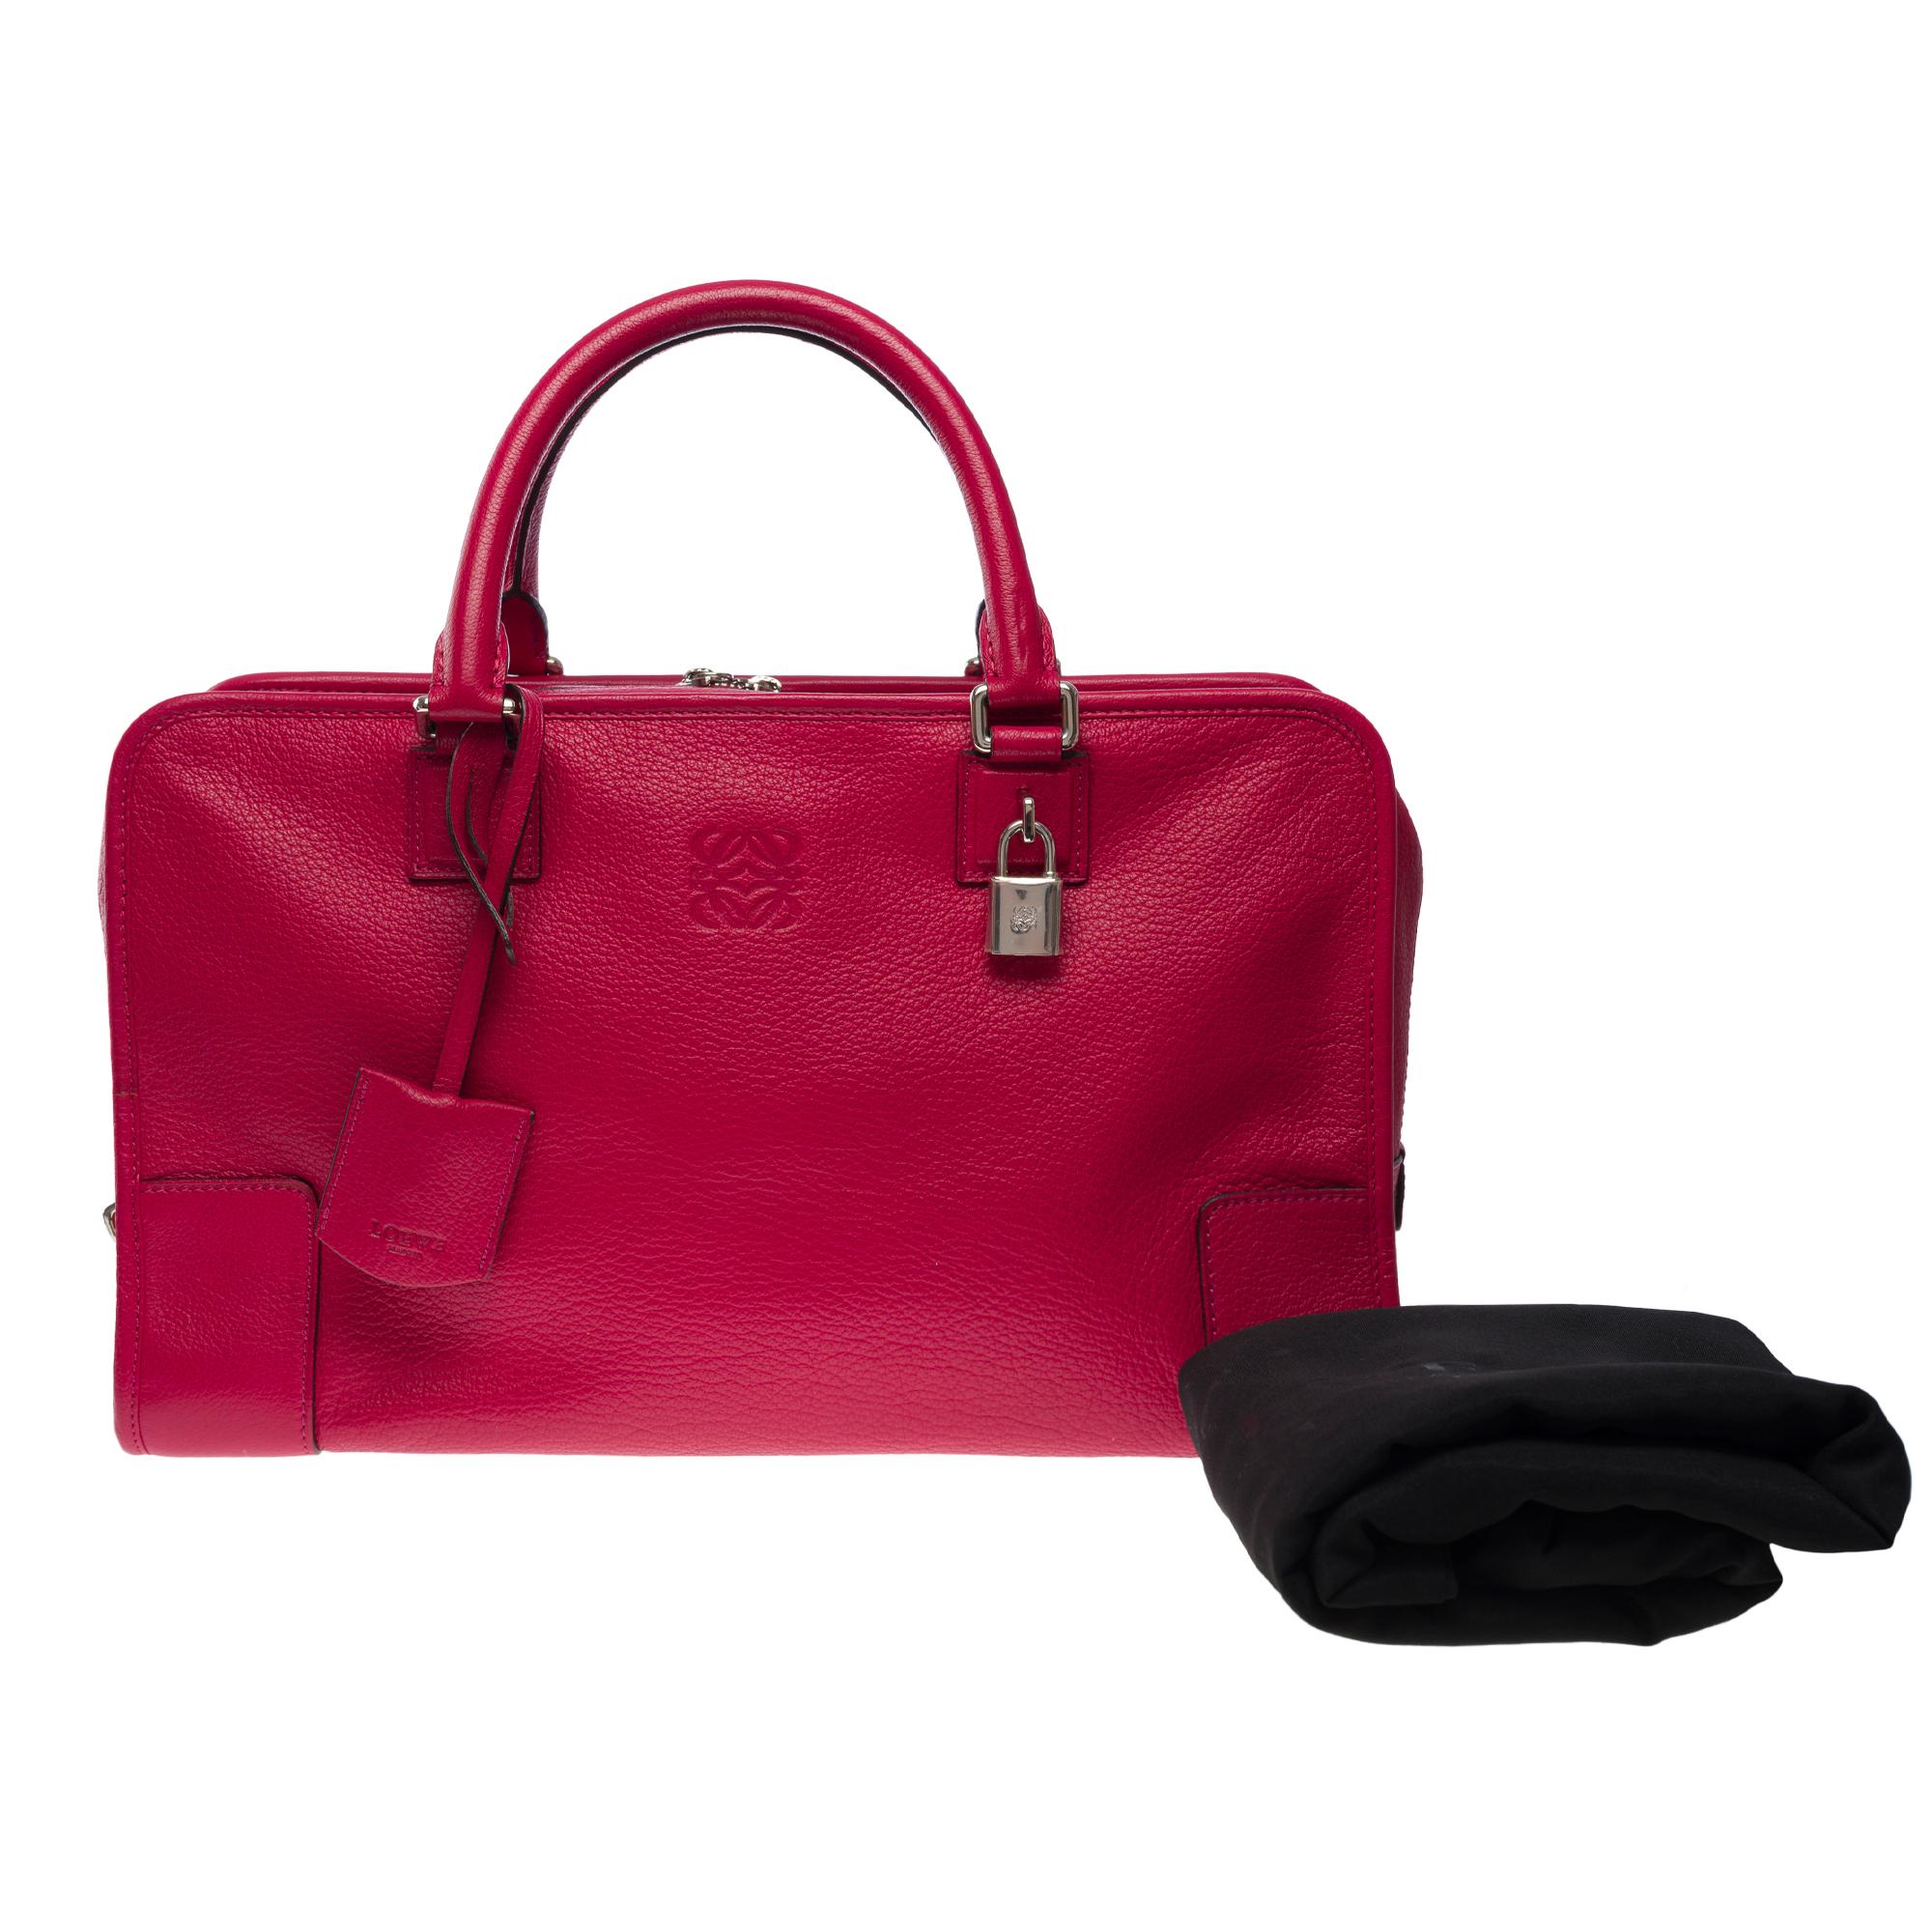 Delightful handbag Loewe Amazona 36 (GM) in red leather, silver metal trim, double handle in red leather for a hand carry

Zipper
Red leather inner lining, patch pocket, zip pocket
Signature: 